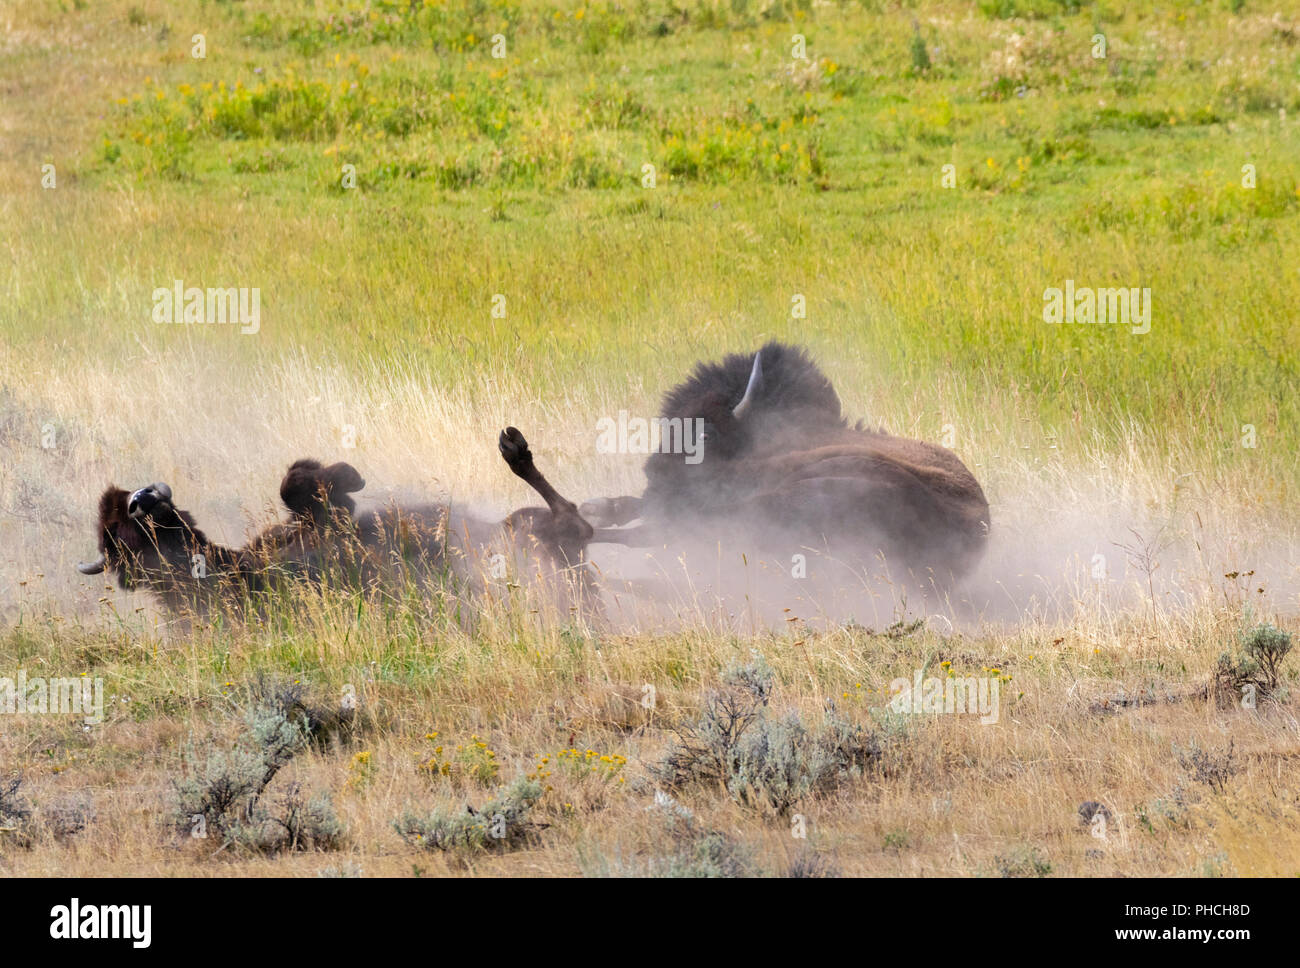 American bison (Bison bison) rolls in a wallow taking a dust bath, Yellowstone National park, Wyoming, USA. Stock Photo